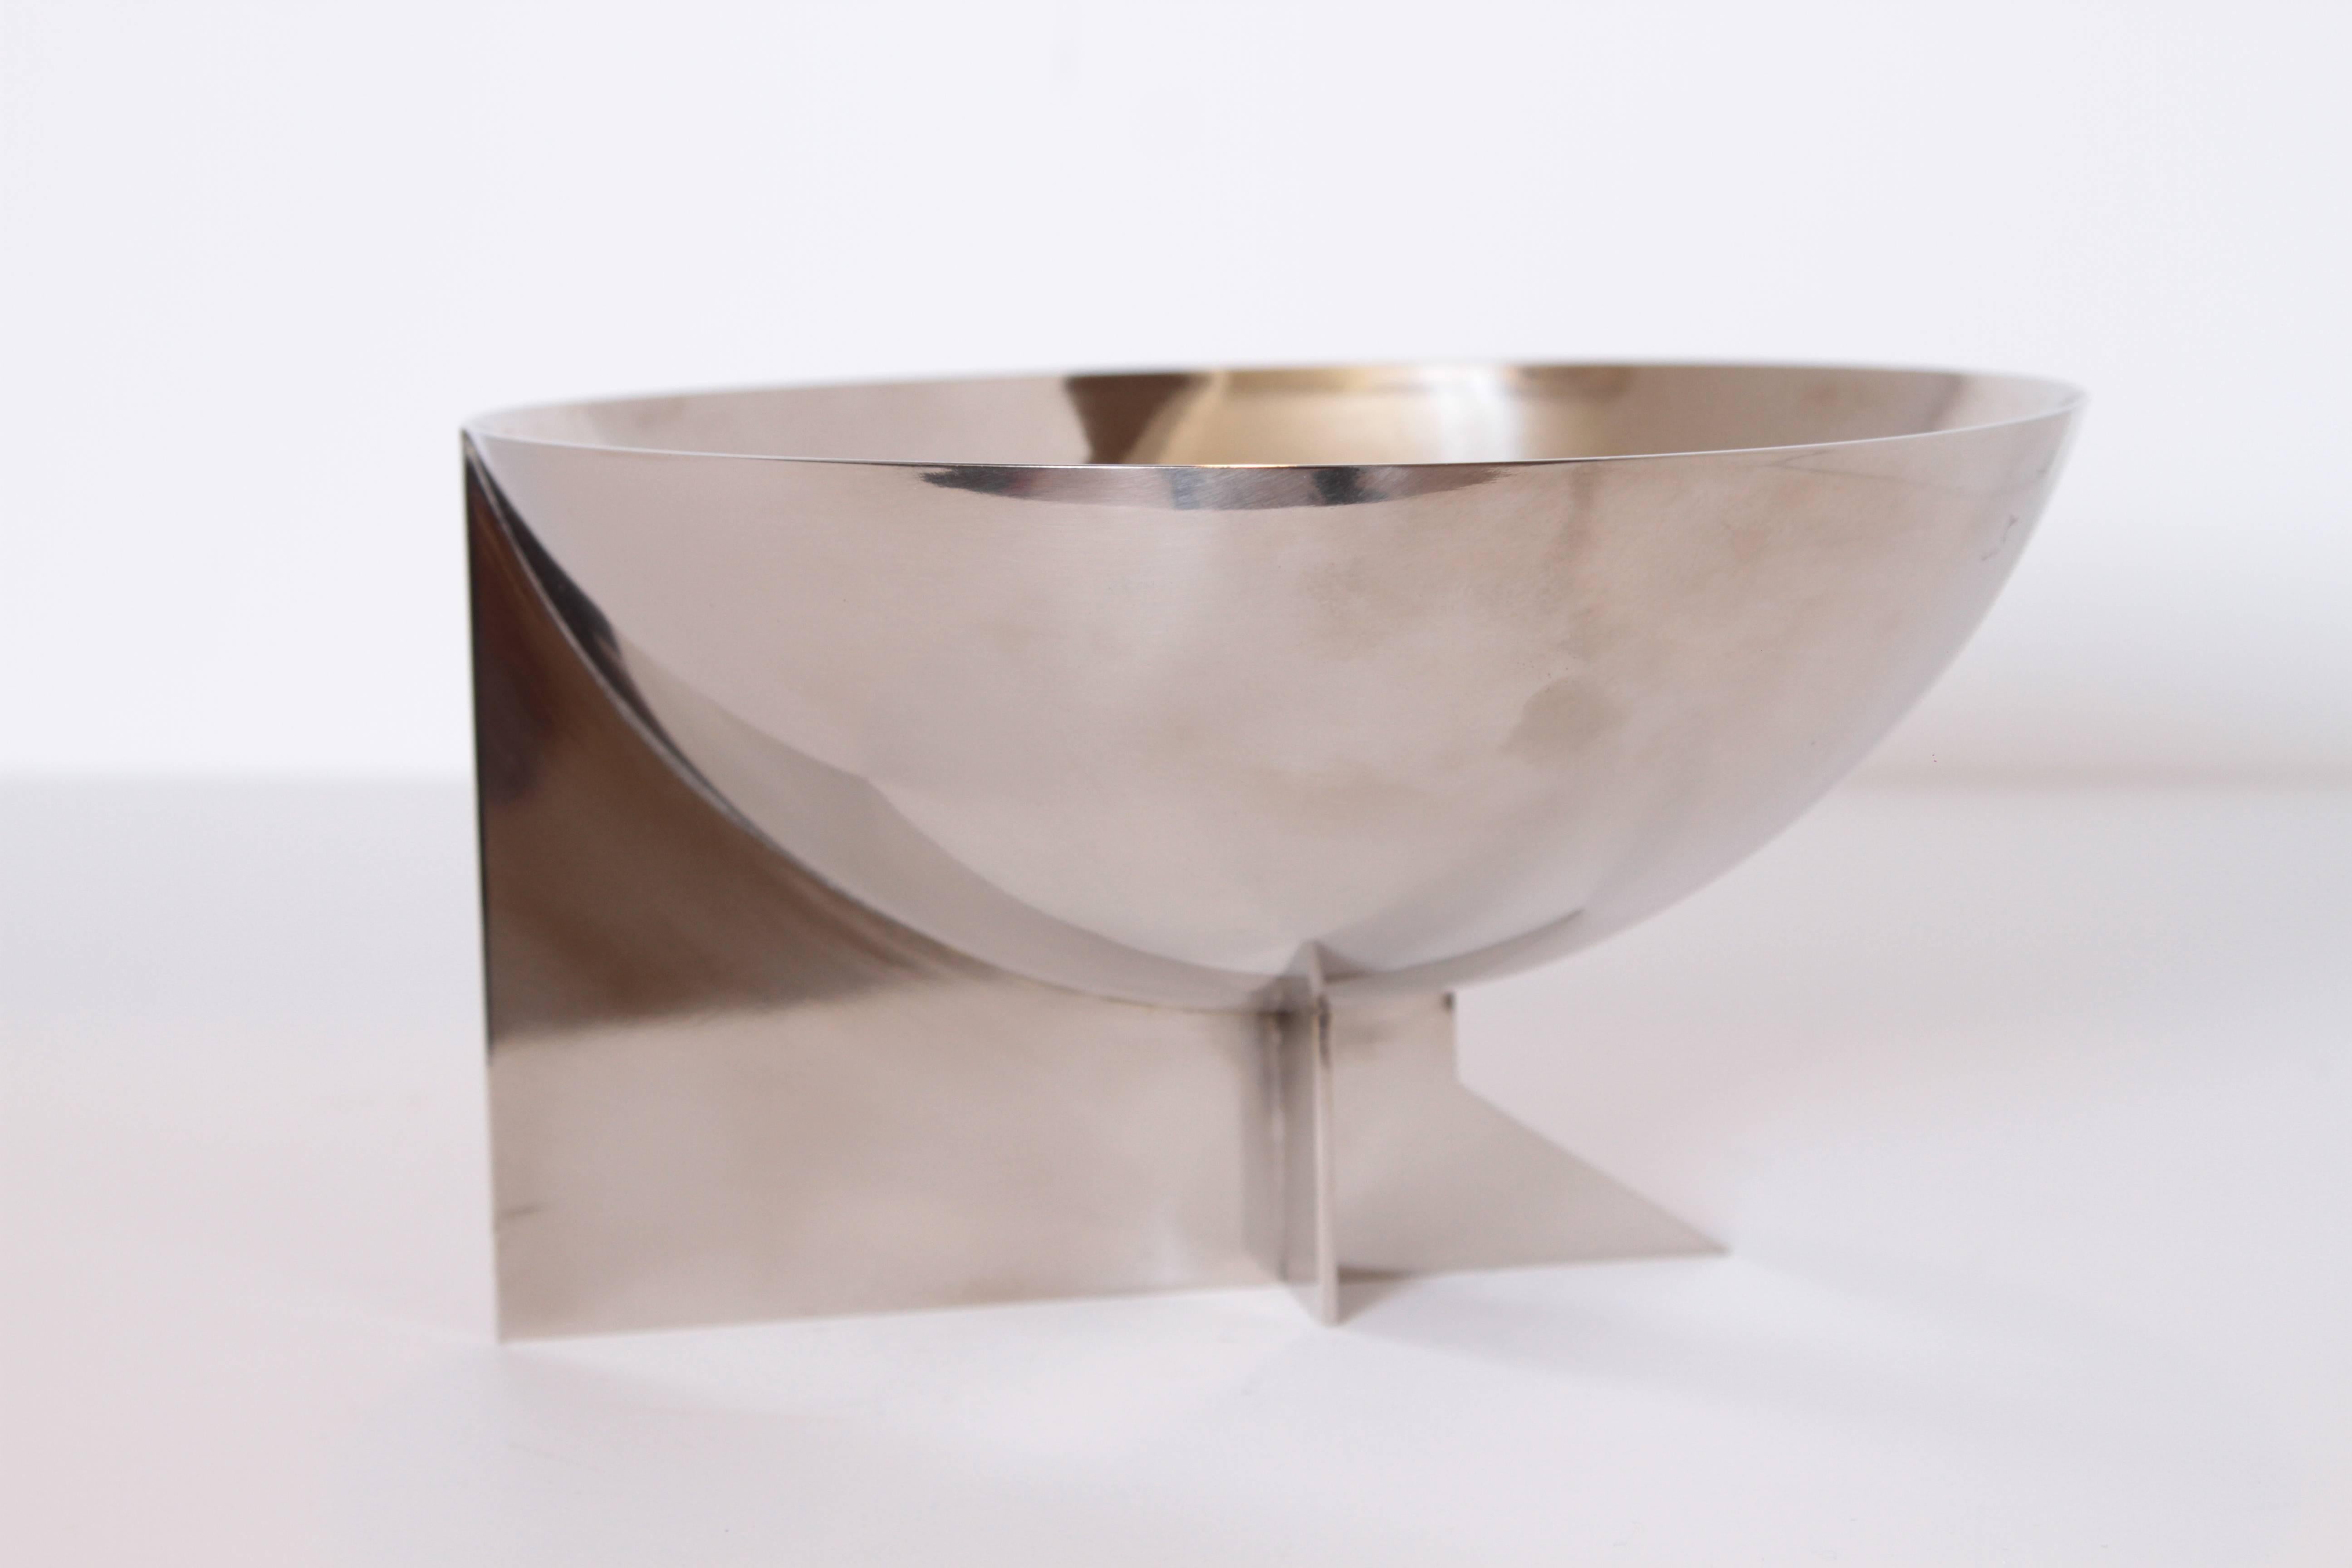 French Machine Age Art Deco Signed Desny Silver Plate Centerpiece Bowl For Sale